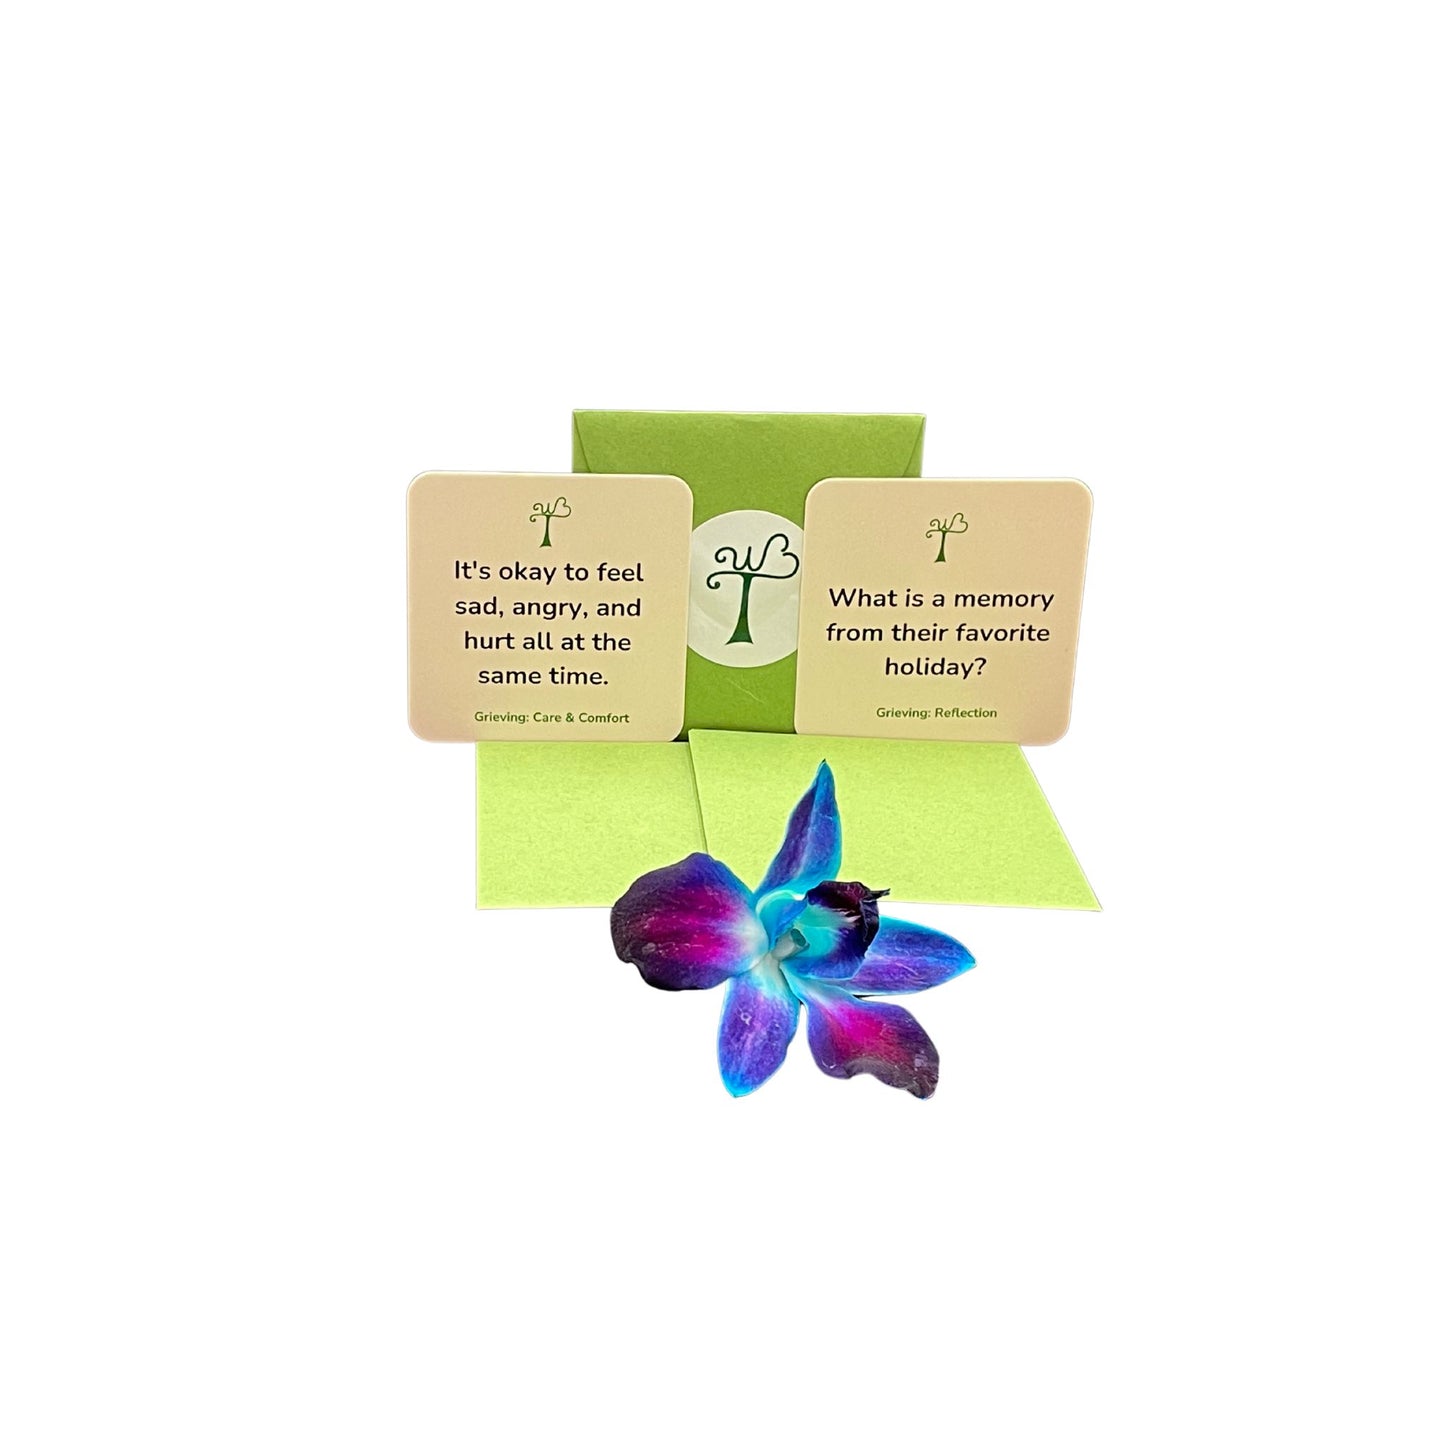 Grieving Support & Reflection Cards Gift Set: Premium version